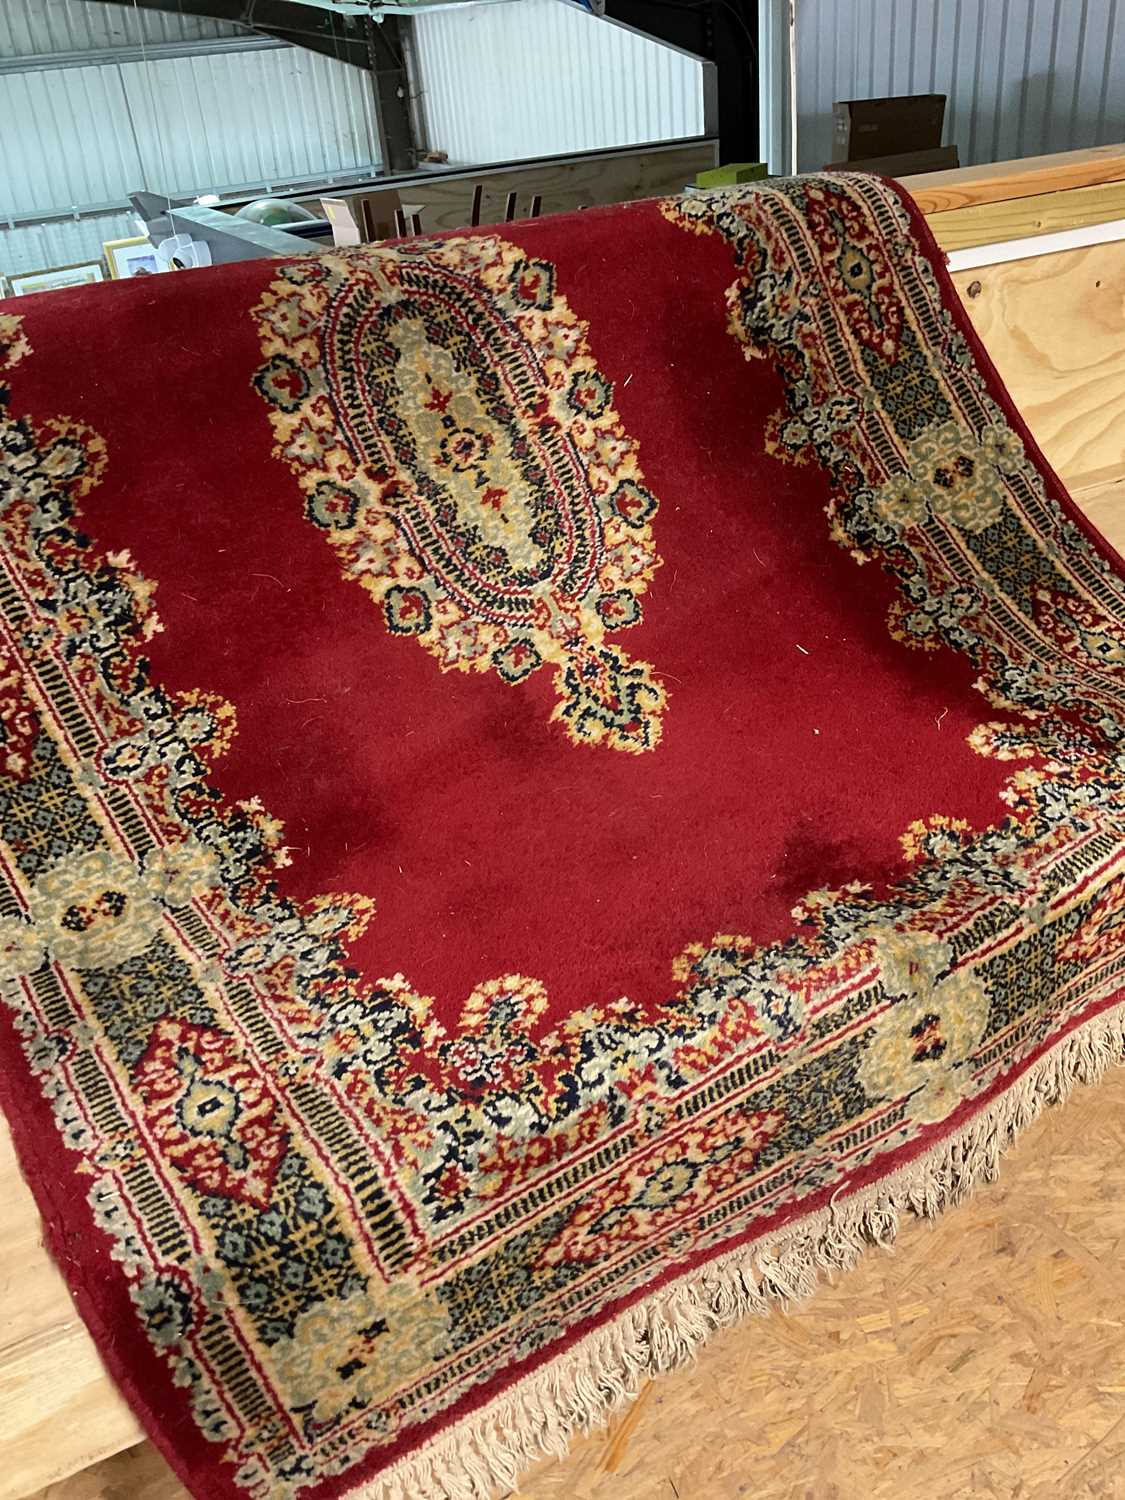 Two vintage Eastern rugs, one a dark red rug with central medallion and decorative border, 122 x - Bild 6 aus 6